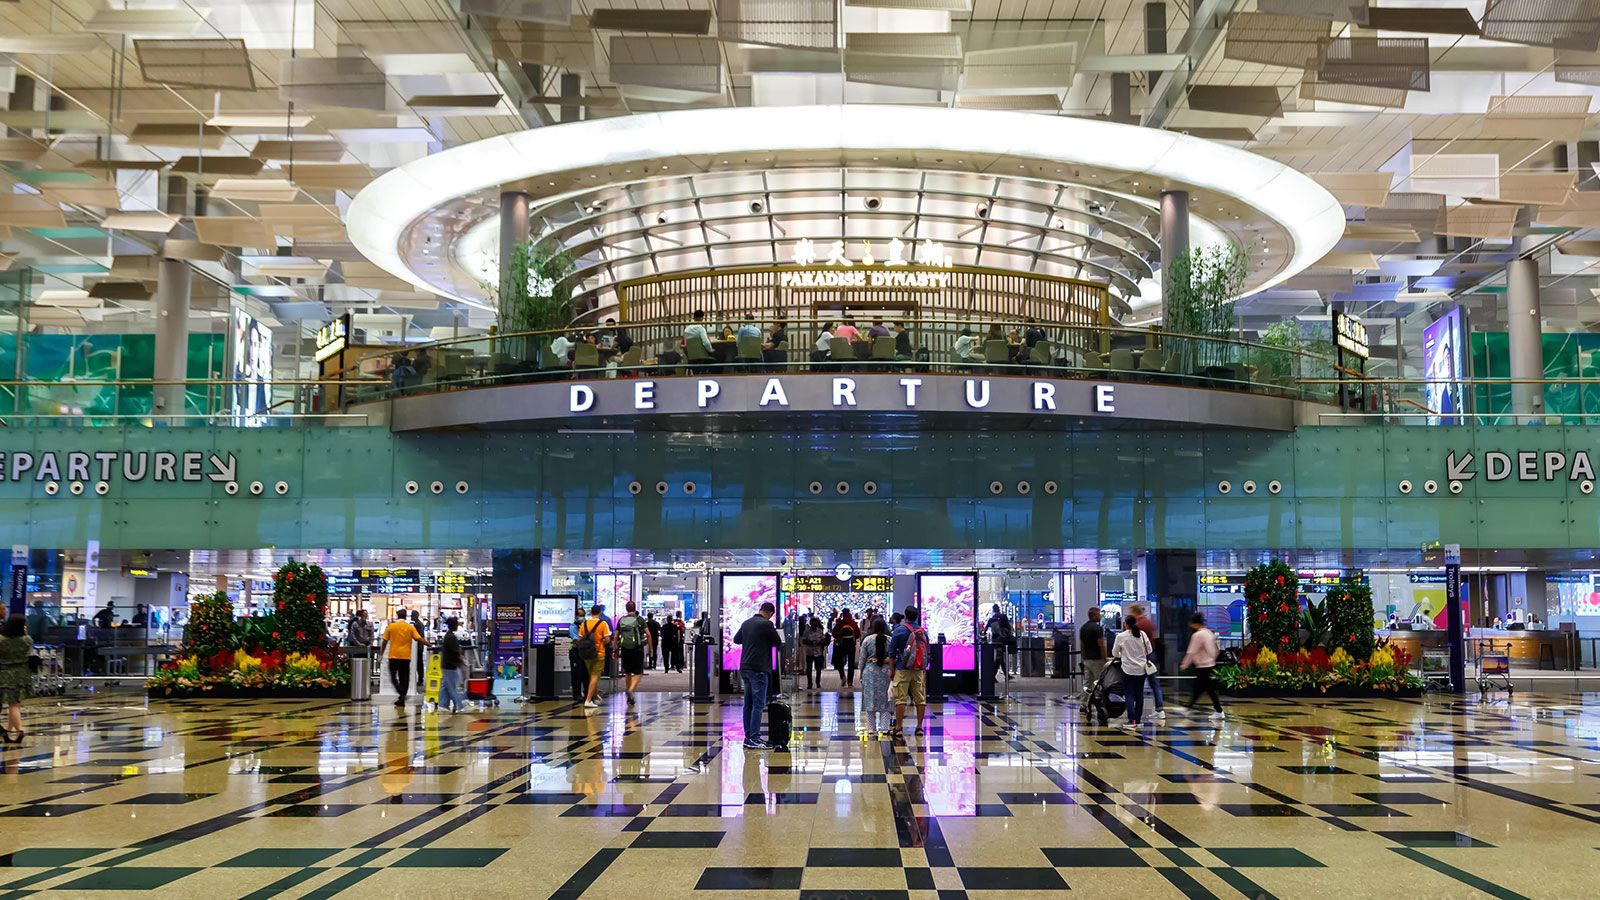 Passenger traffic at Singapore's Changi airport expected to recover fully  by 2024, World